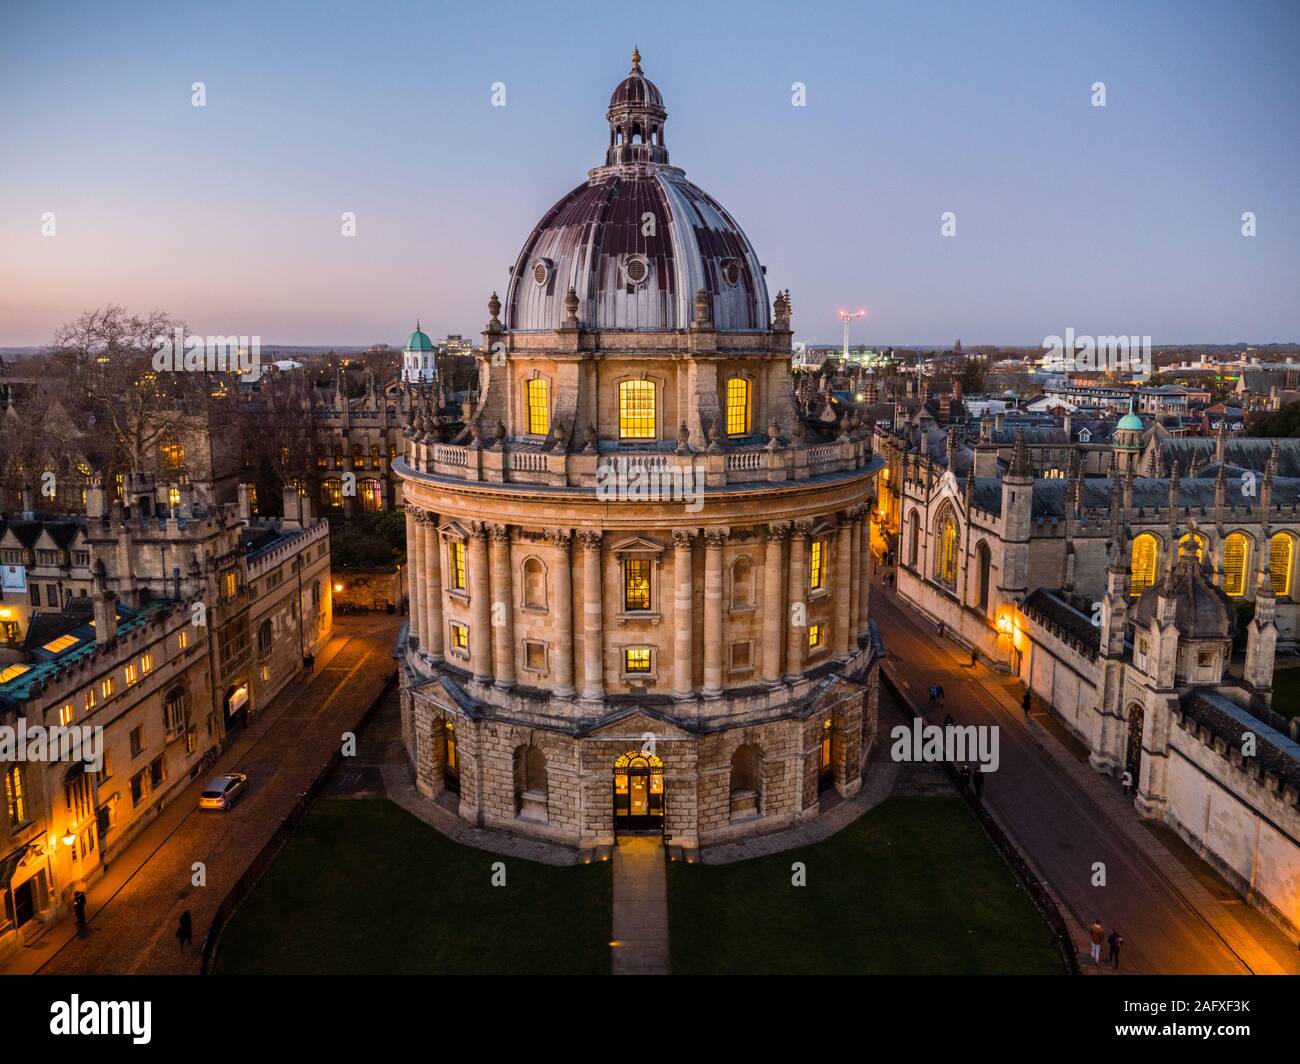 Radcliffe Camera Oxford, Night Time, Radcliffe Square, University of Oxford, Oxford, Oxfordshire, England, UK, GB. Stock Photo